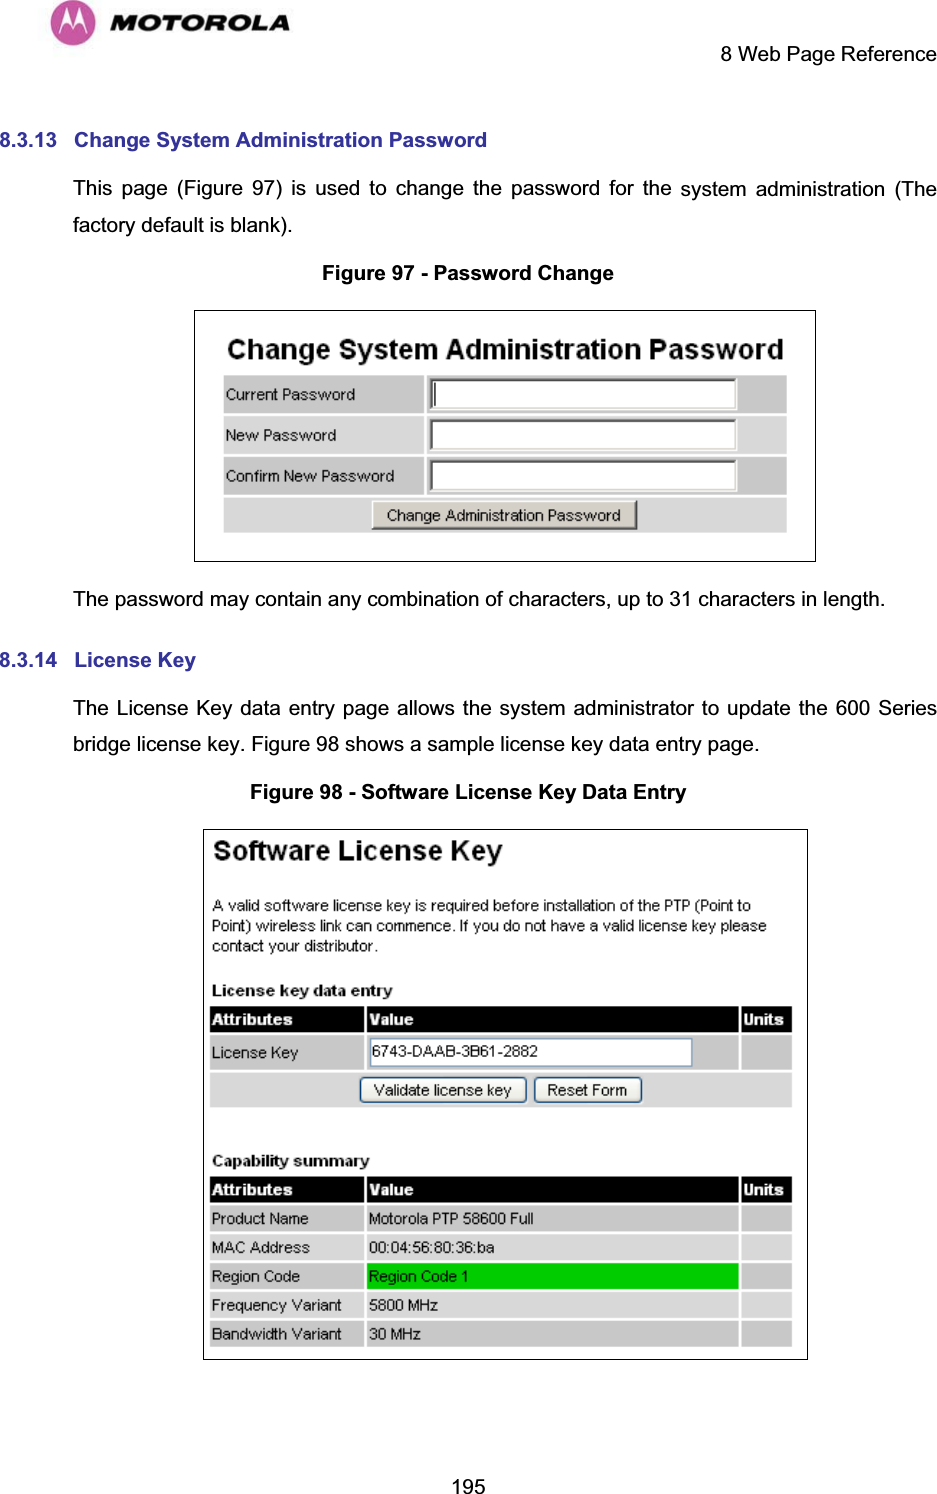     8 Web Page Reference  1958.3.13  Change System Administration Password  This page (Figure 97) is used to change the password for the system administration (The factory default is blank). Figure 97 - Password Change  The password may contain any combination of characters, up to 31 characters in length. 8.3.14 License Key The License Key data entry page allows the system administrator to update the 600 Series bridge license key. Figure 98 shows a sample license key data entry page. Figure 98 - Software License Key Data Entry   